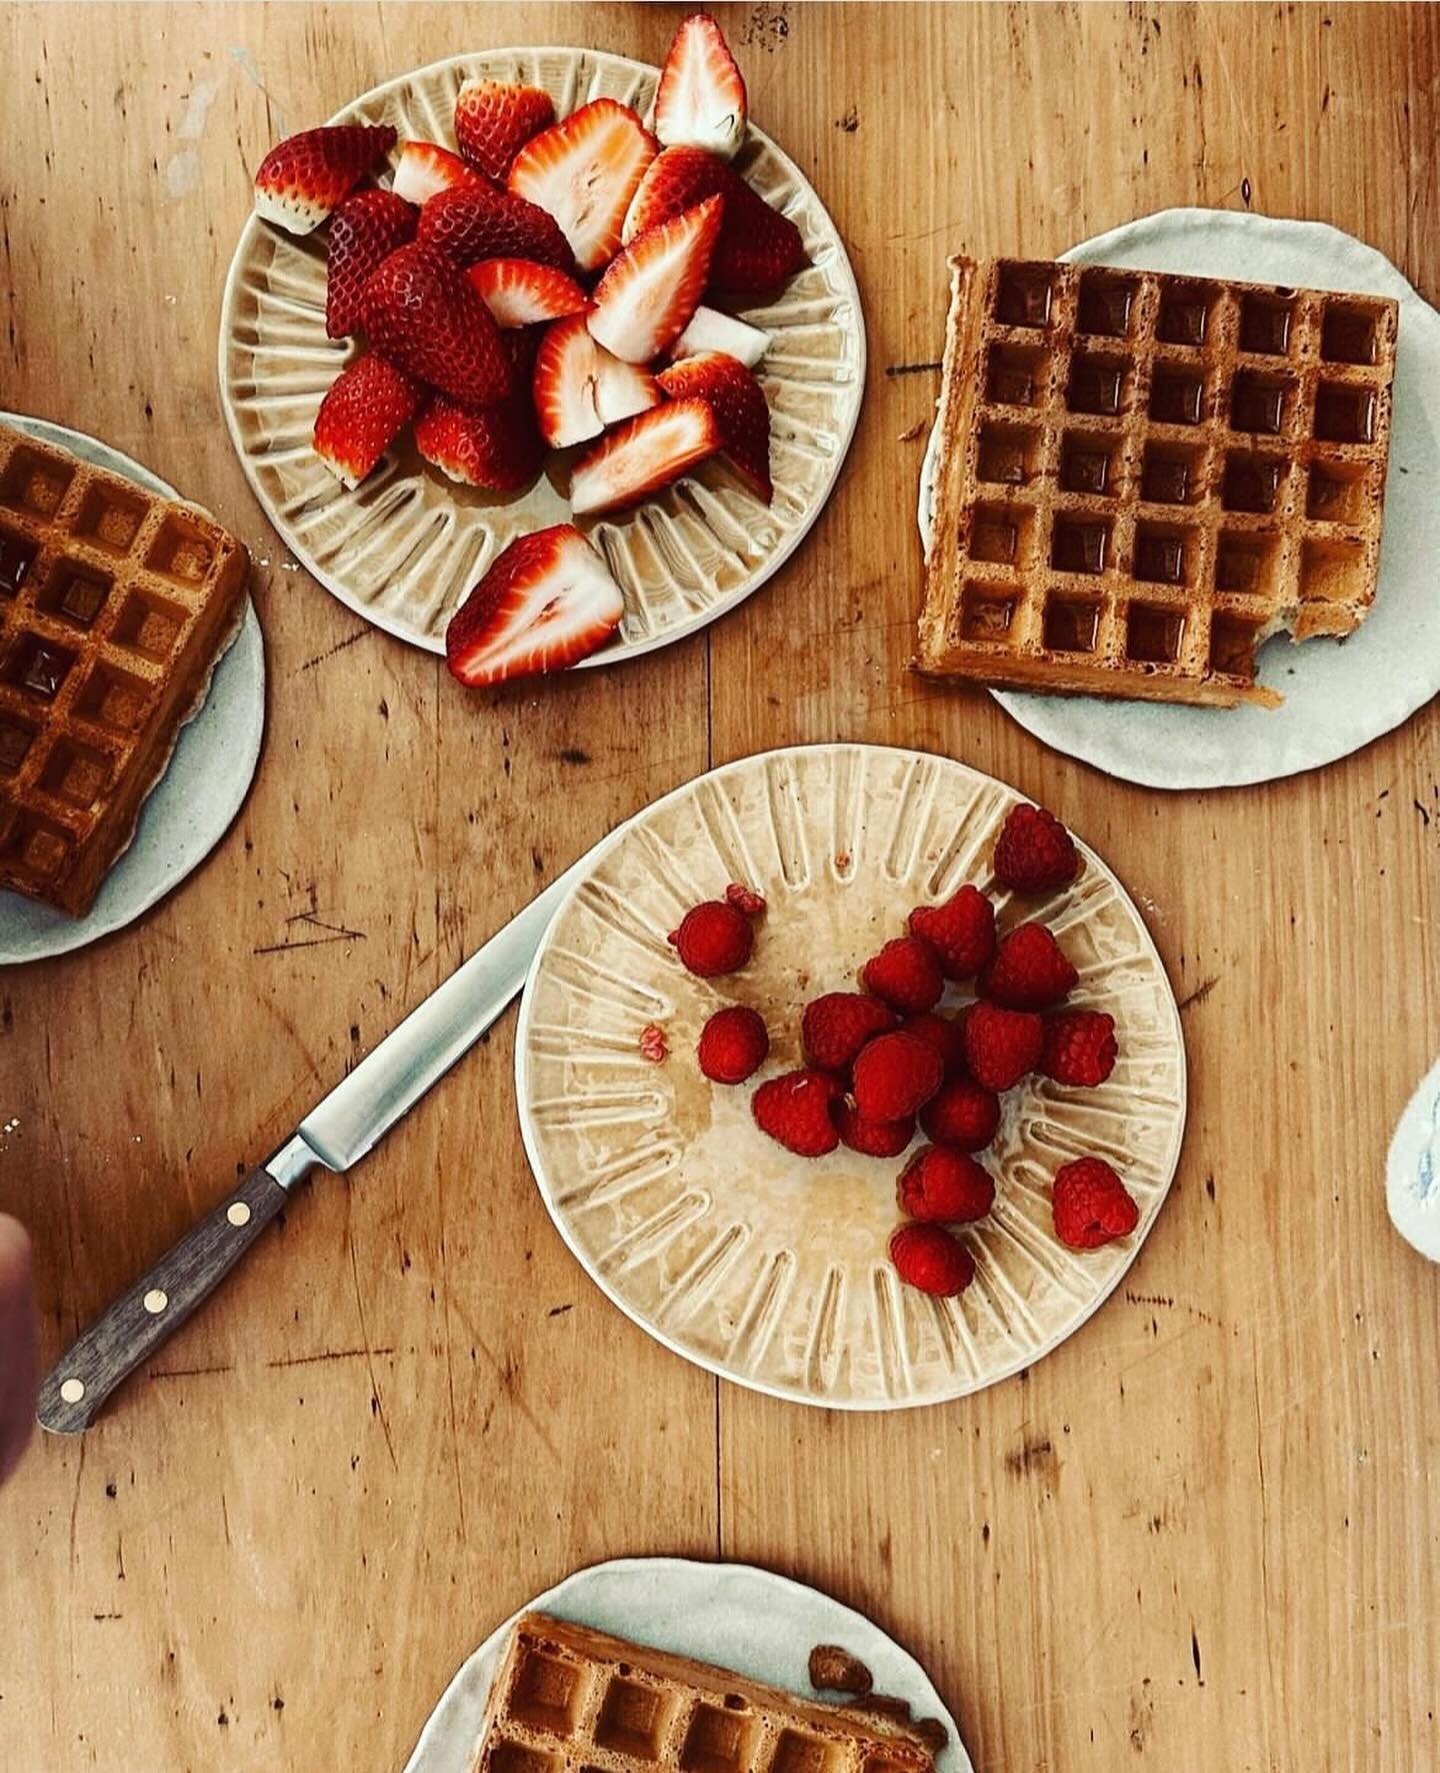 This kind of morning 🍓 
Morning scene at @bytheseasidedaisies featuring the Amber side plates